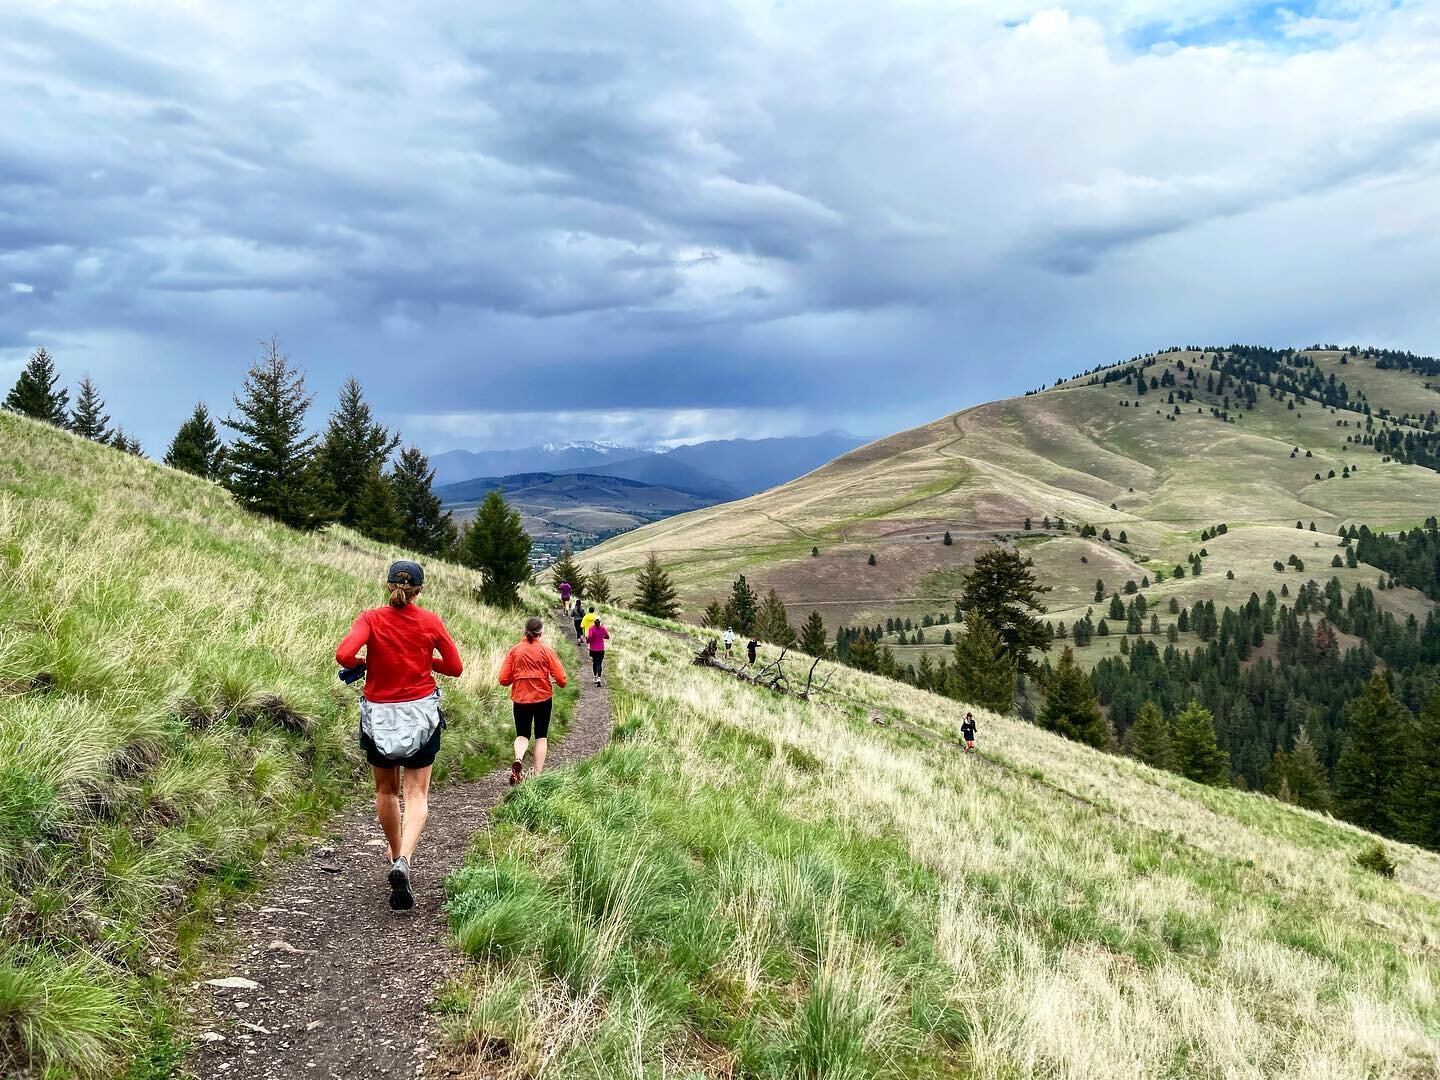 Passing showers make for the BEST clouds. Had a wonderful eight weeks sharing trails with a great group of folks for another session of @runwildmissoula trail classes. Thanks to @sarahknutson89 being my partner in crime and reminding me to send email